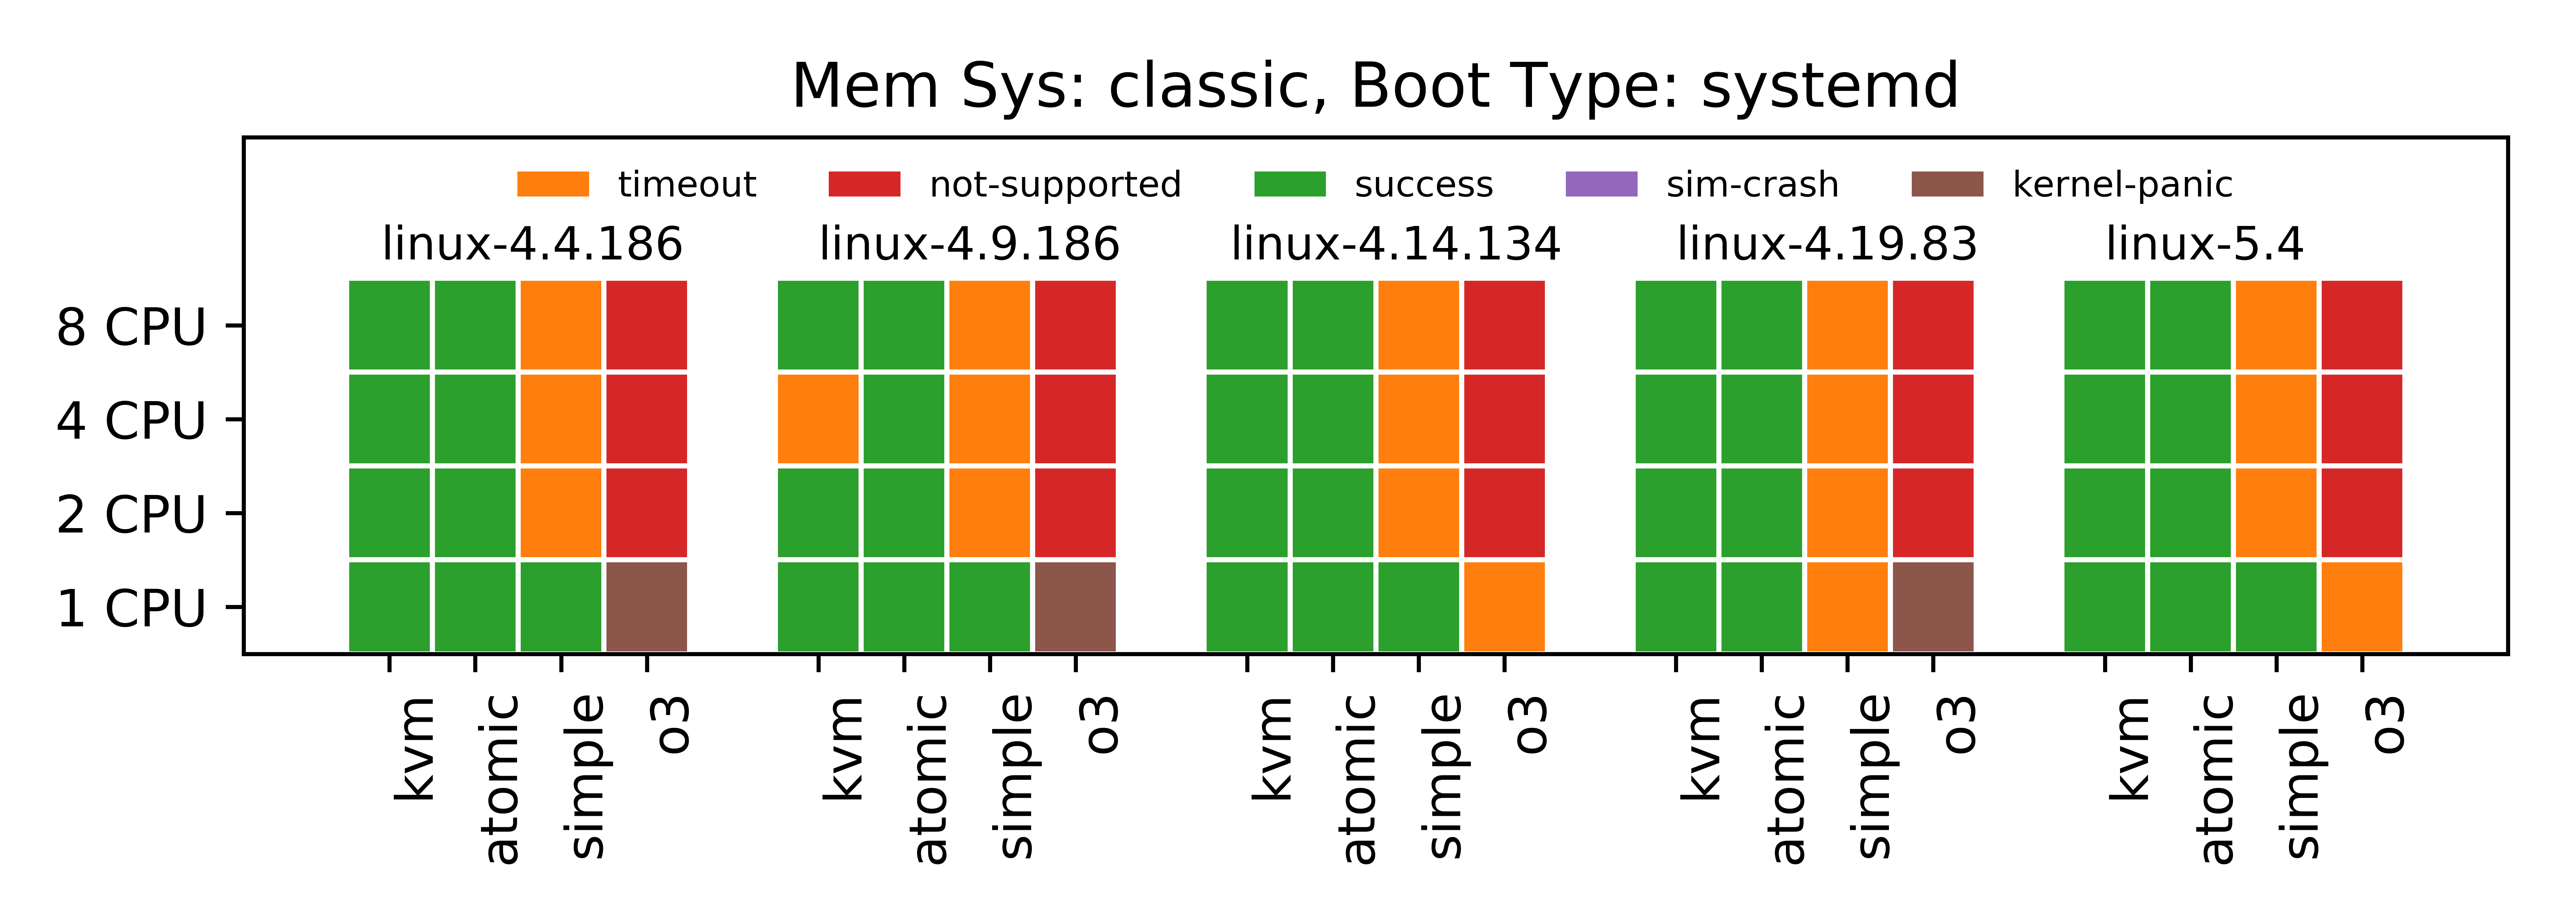 Linux boot status for classic memory system and systemd boot